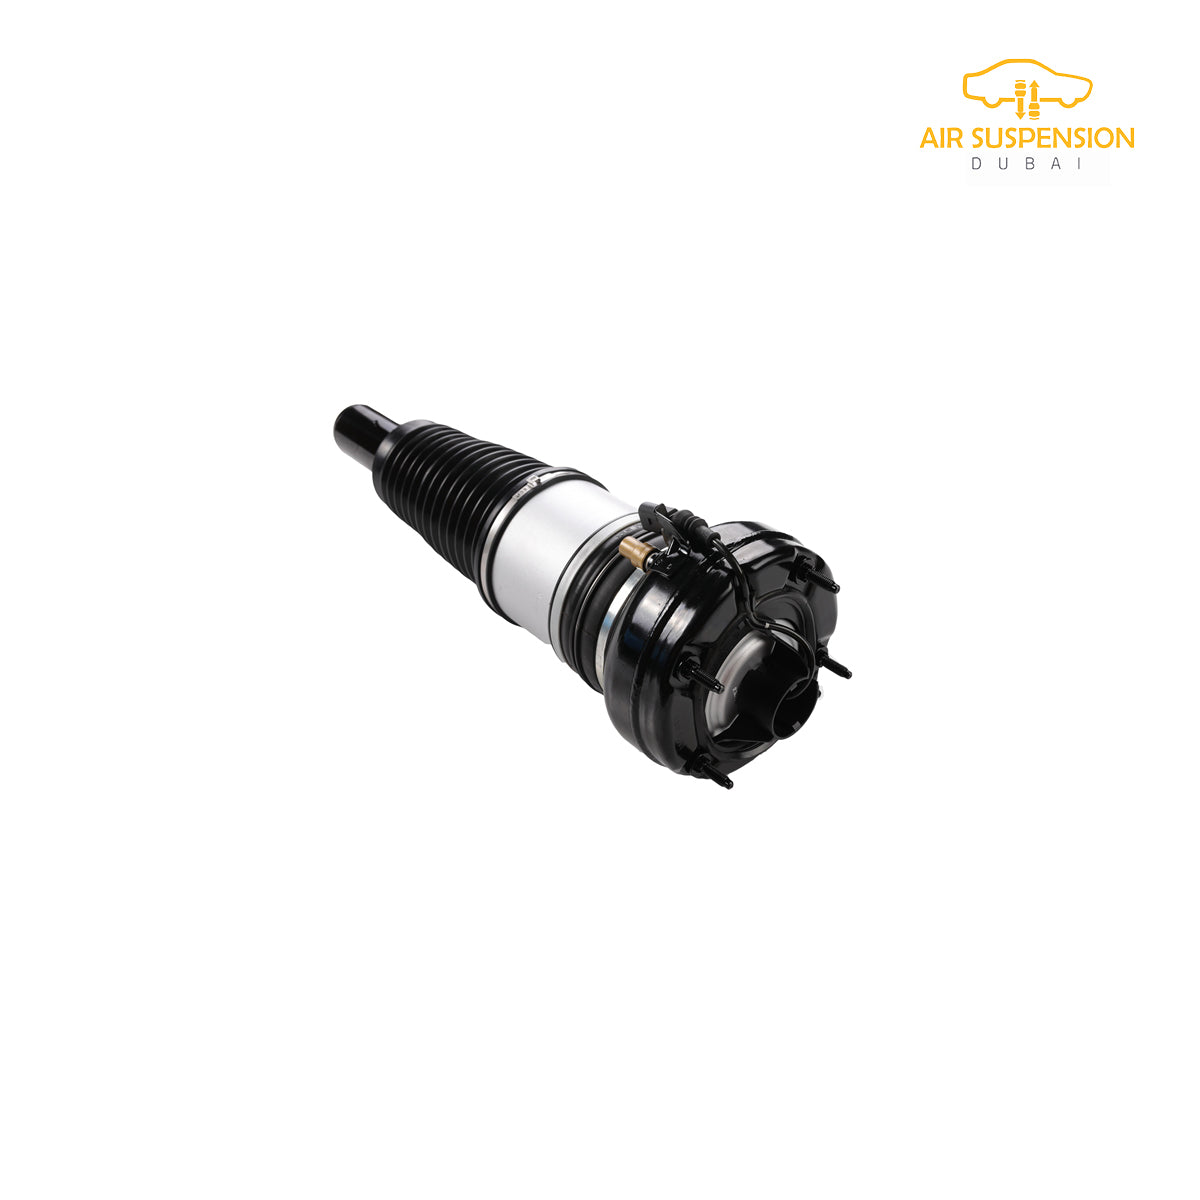 Audi A6 Audi A8 front Air Suspension Air Shock Absorber